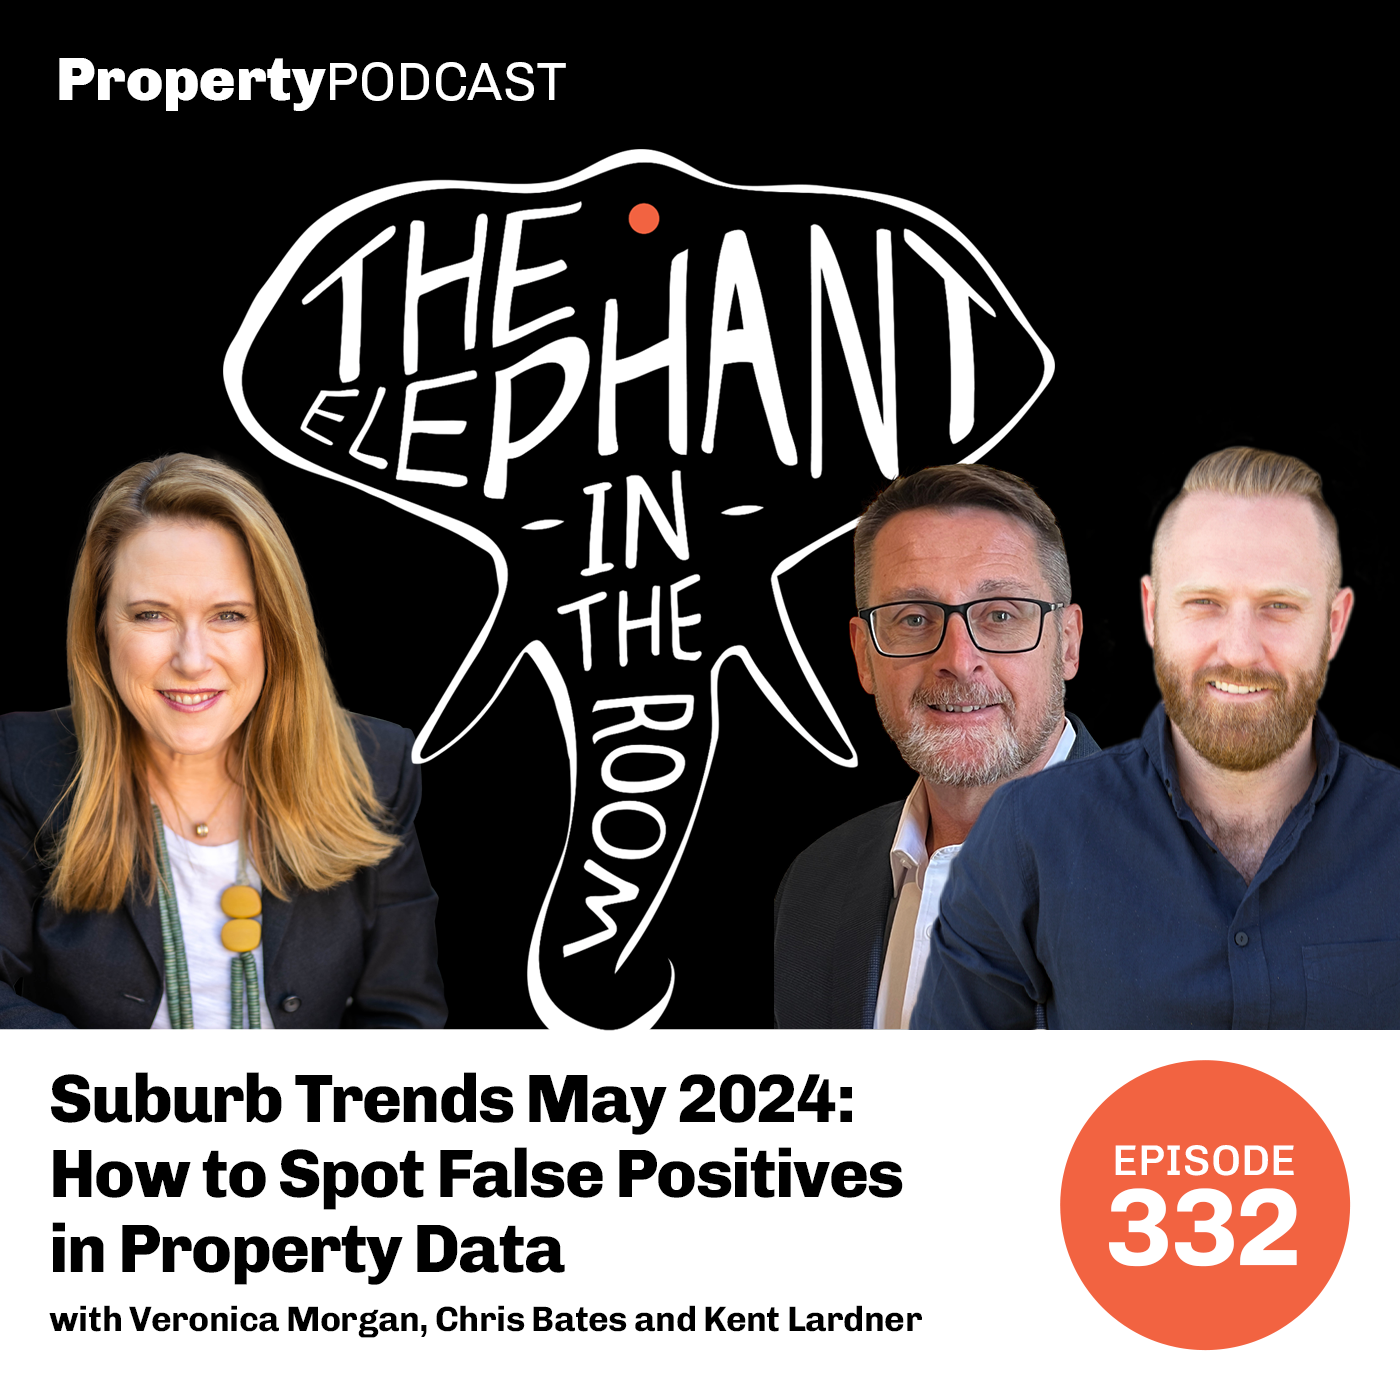 Suburb Trends May 2024: How to Spot False Positives in Property Data